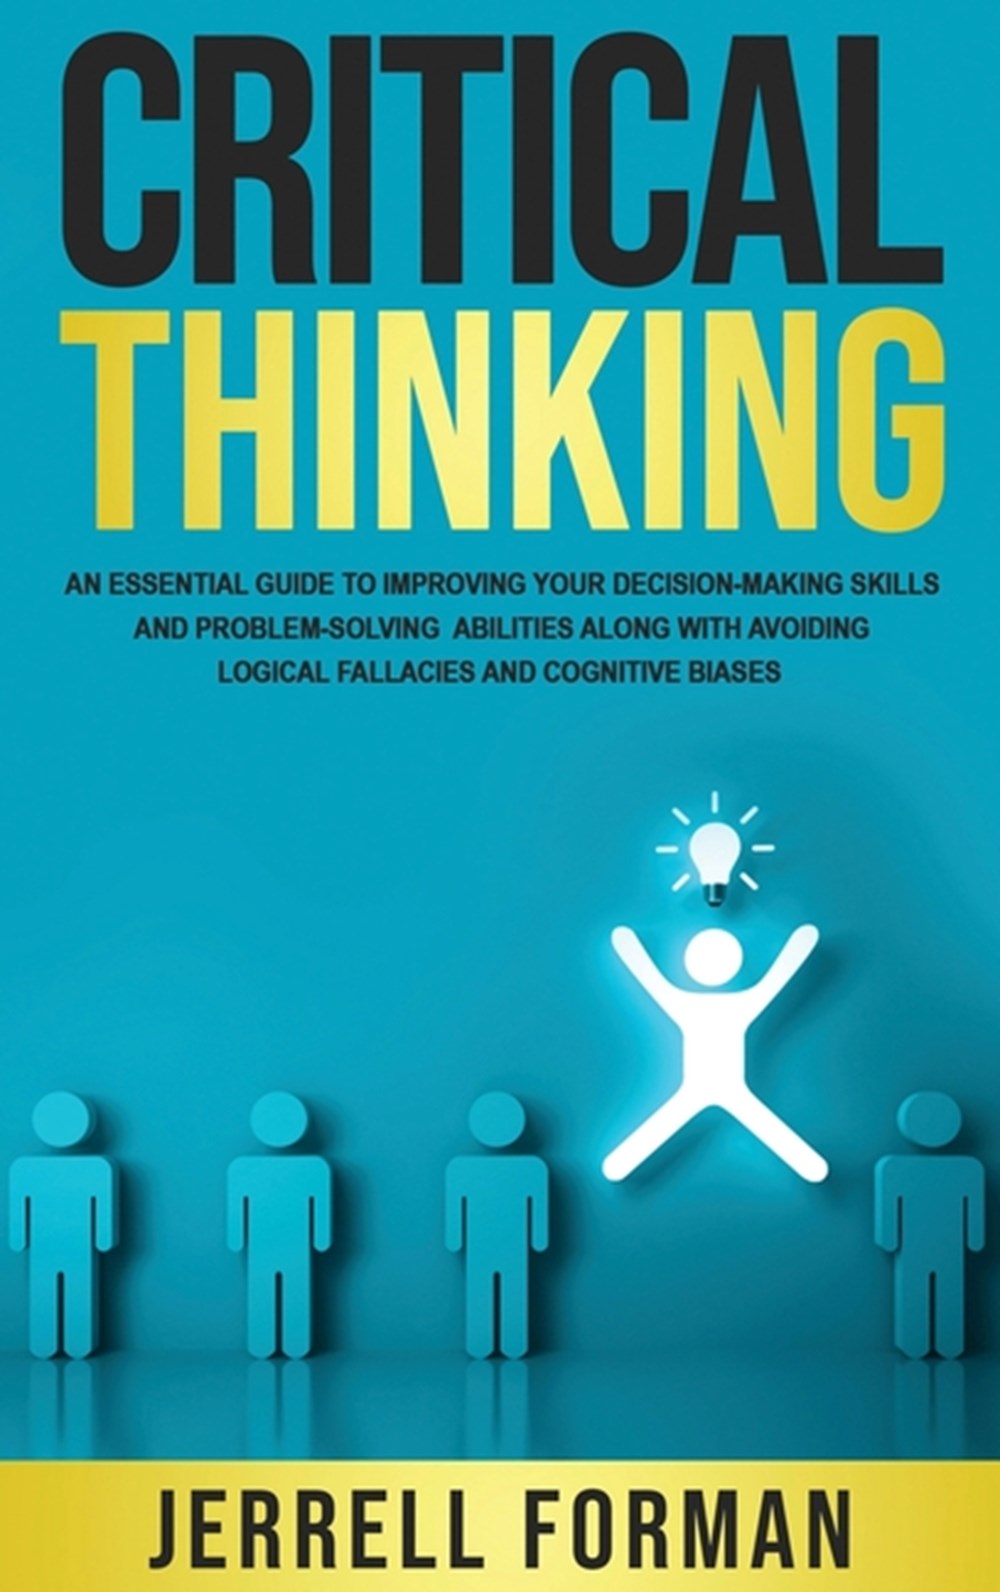 Critical Thinking: An Essential Guide to Improving Your Decision-Making Skills and Problem-Solving A